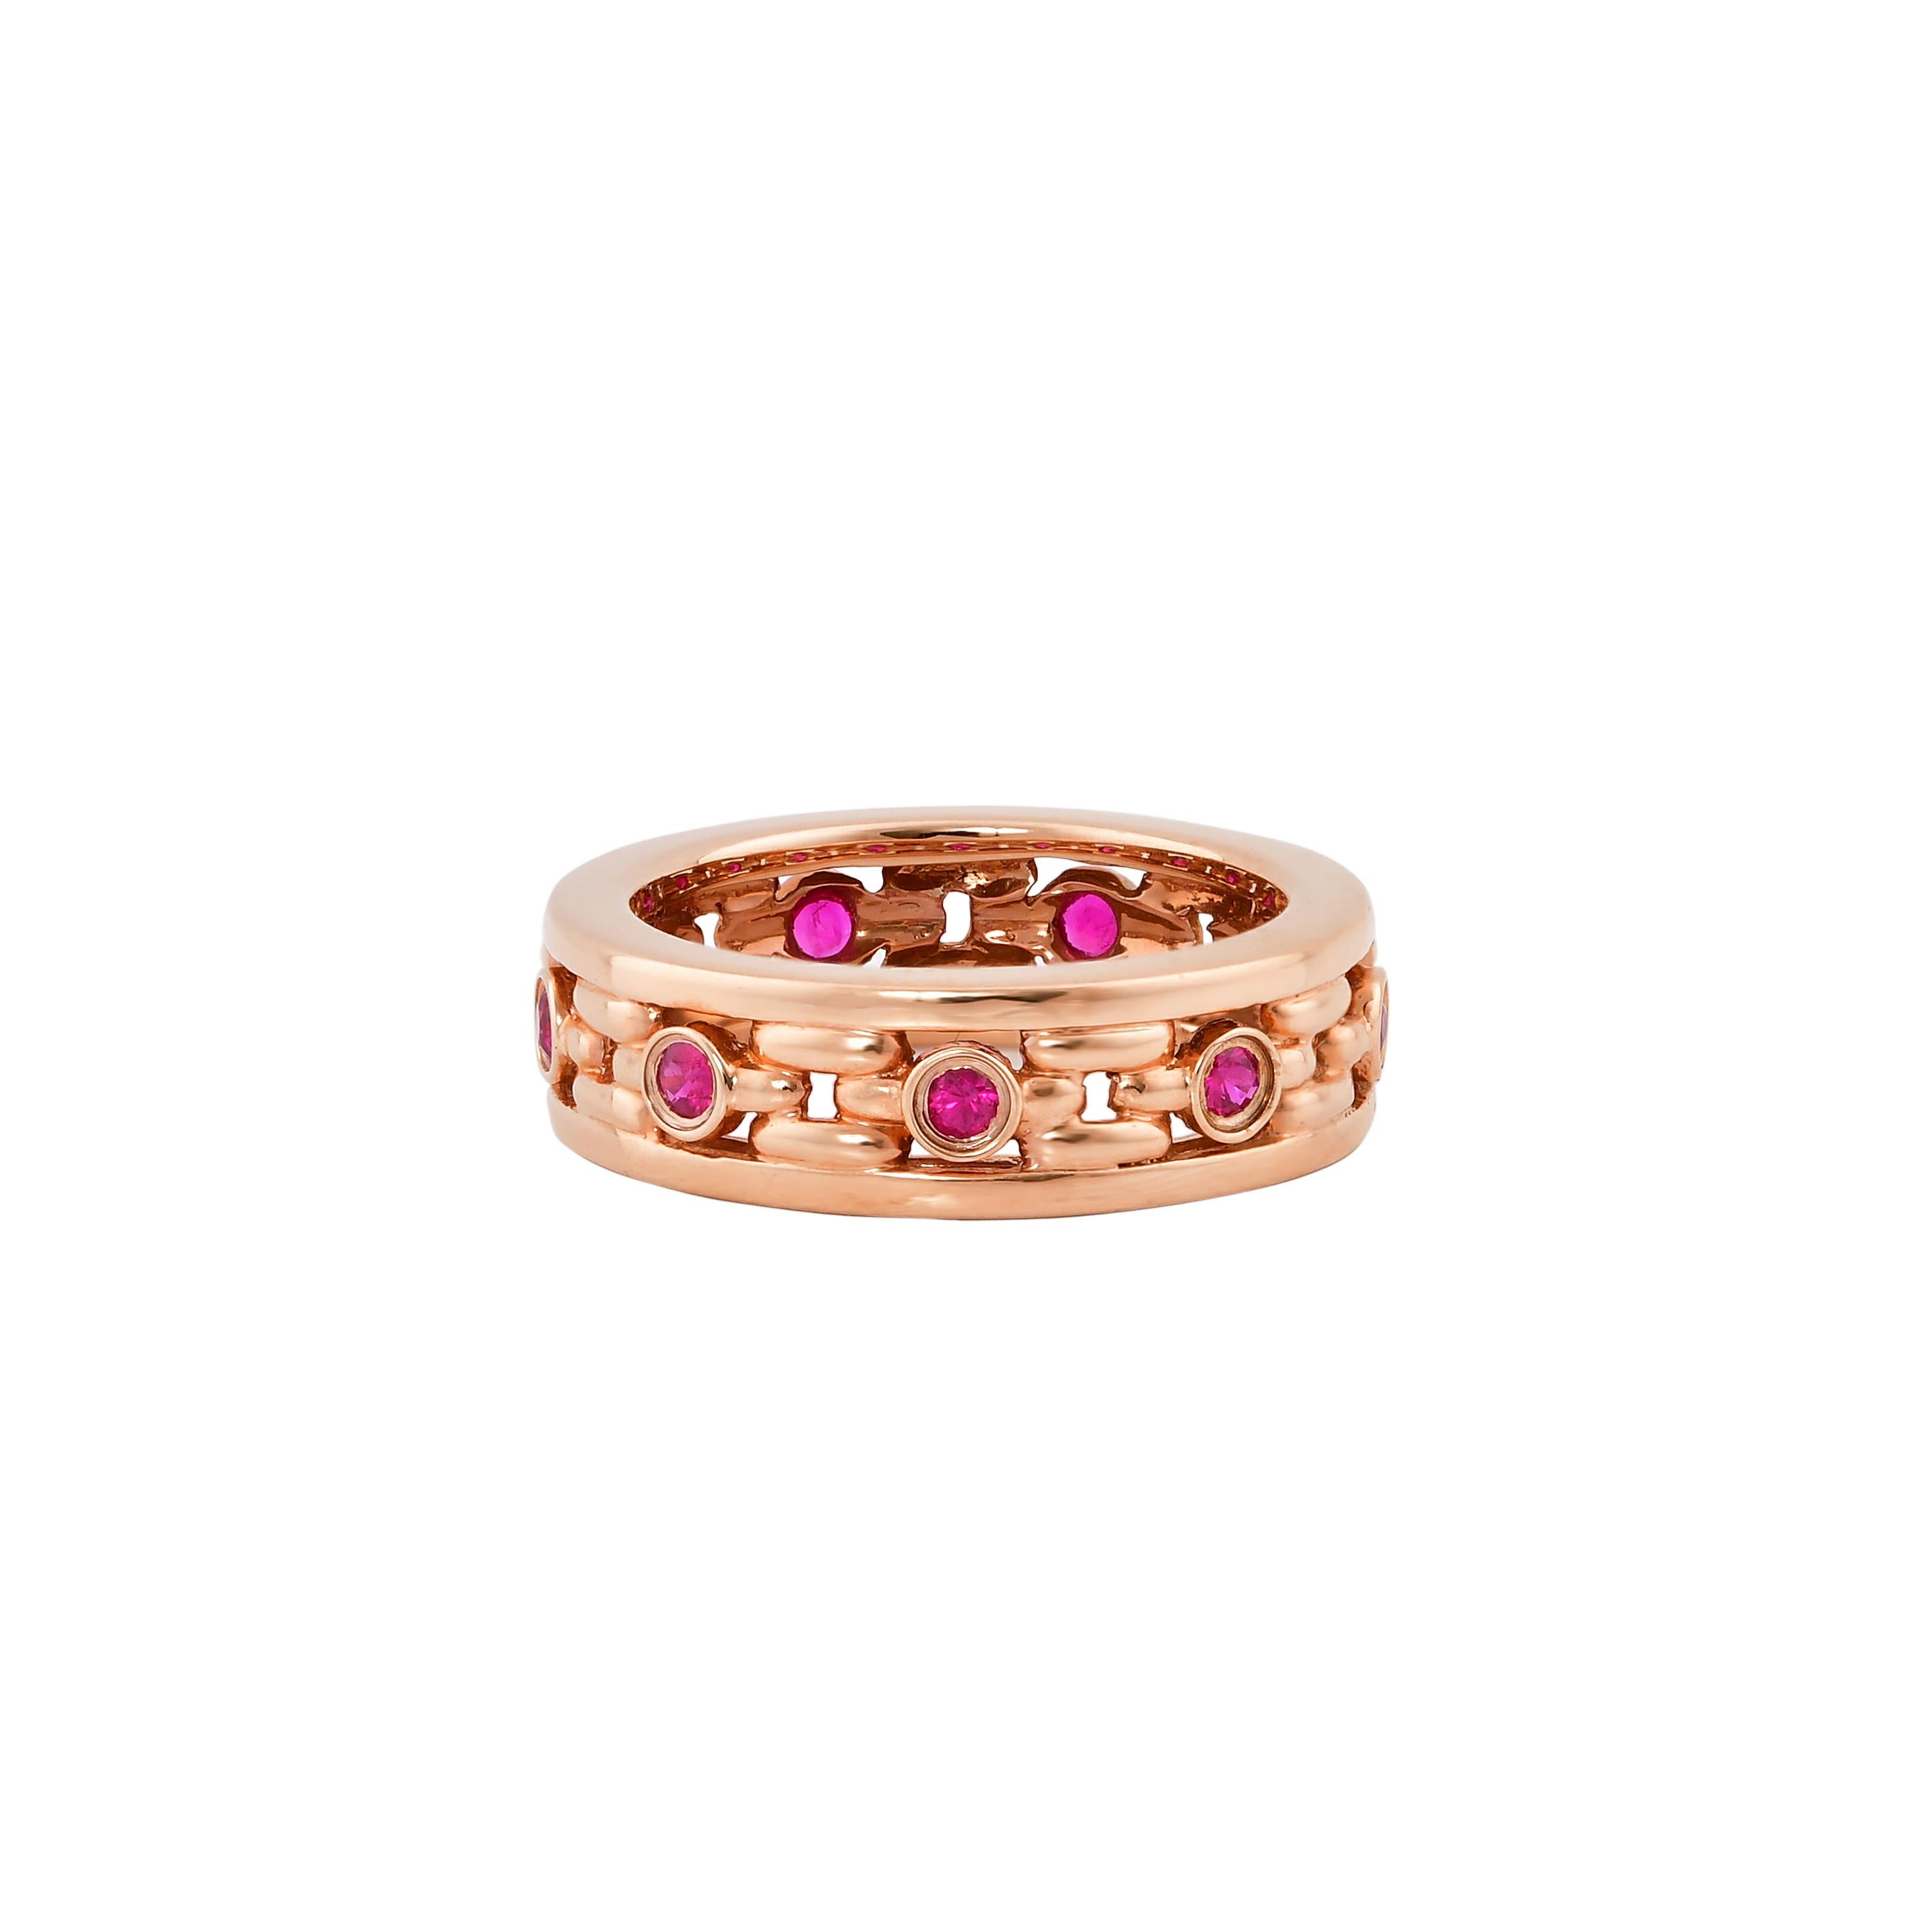 Unique and Designer Cocktail Rings by Sunita Nahata Fine Design.

Classic Ruby ring in 14K Rose gold. 

Ruby: 0.390 carat, 2.00mm size, round shape.

Gold: 5.60g, 14K Rose gold. 
Ring Size: US 6.75 - Size can be adjusted for free upon request -